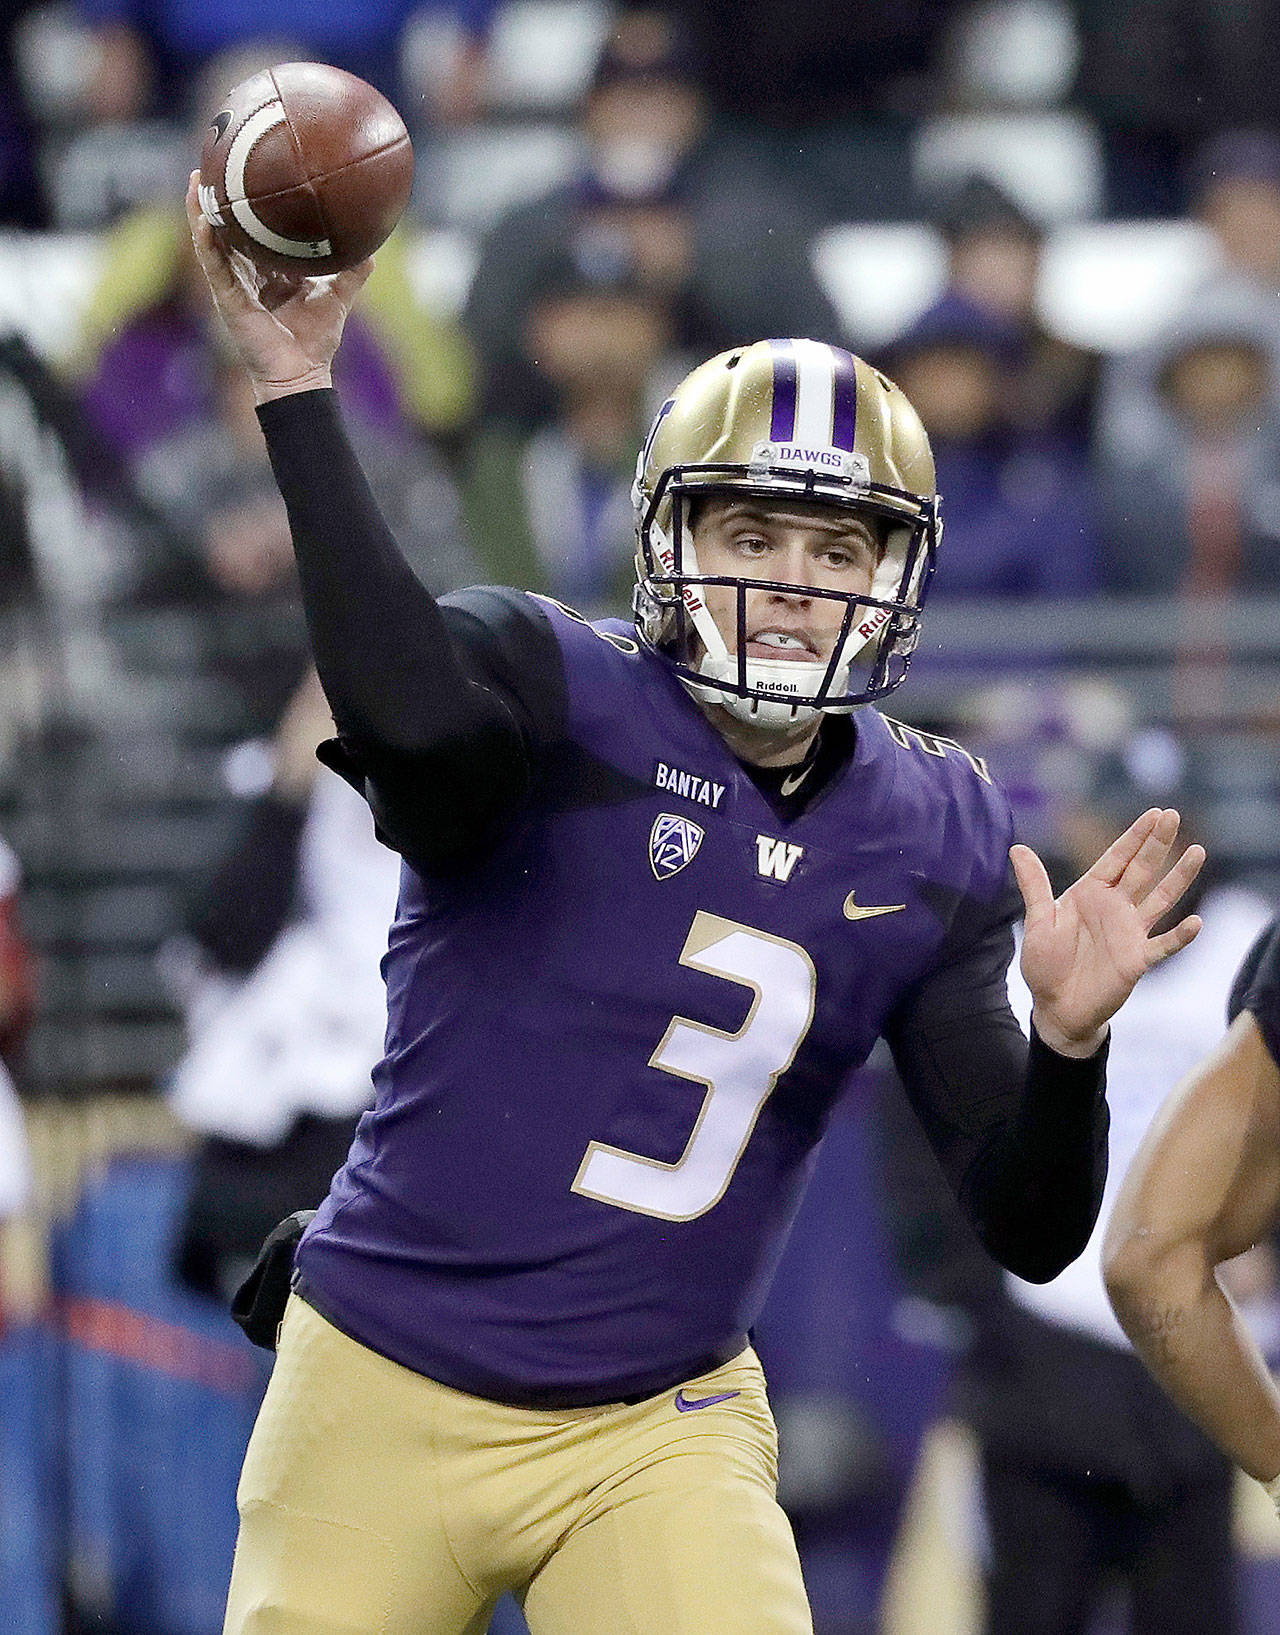 Washington quarterback Jake Browning throws during the first half of the Huskies’ 27-23 win over Stanford last Saturday in Seattle. (AP Photo/Elaine Thompson)